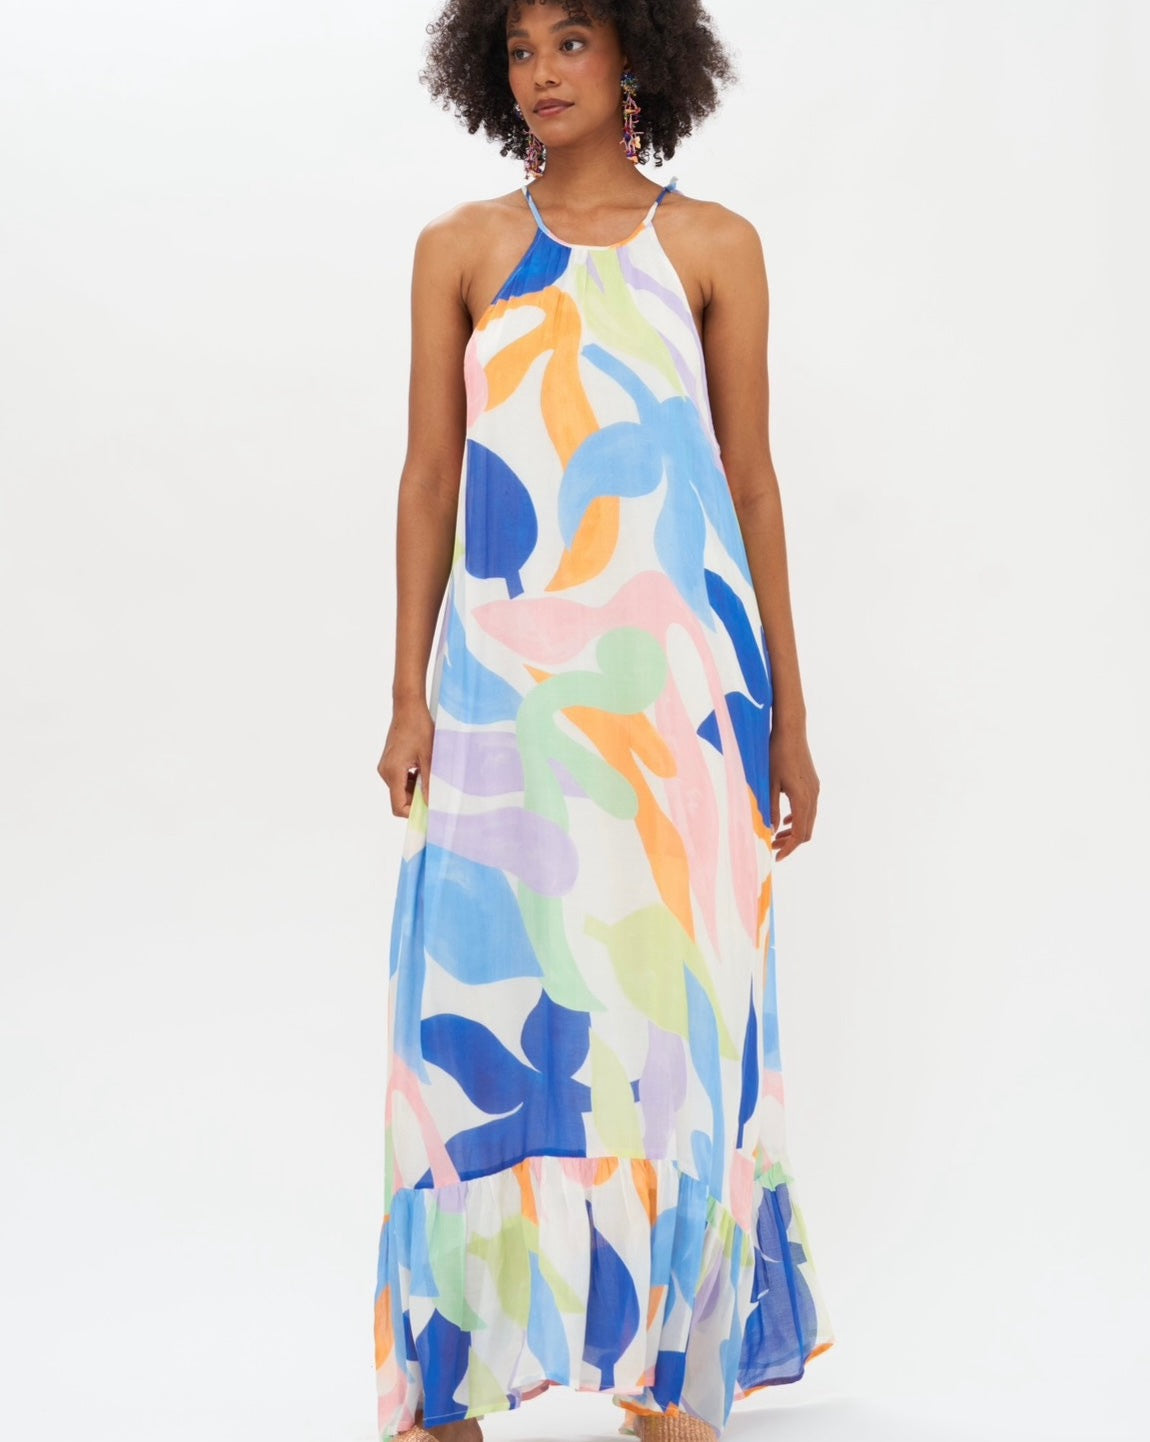 Beautiful cotton abstract maxi dress by Oliphant.